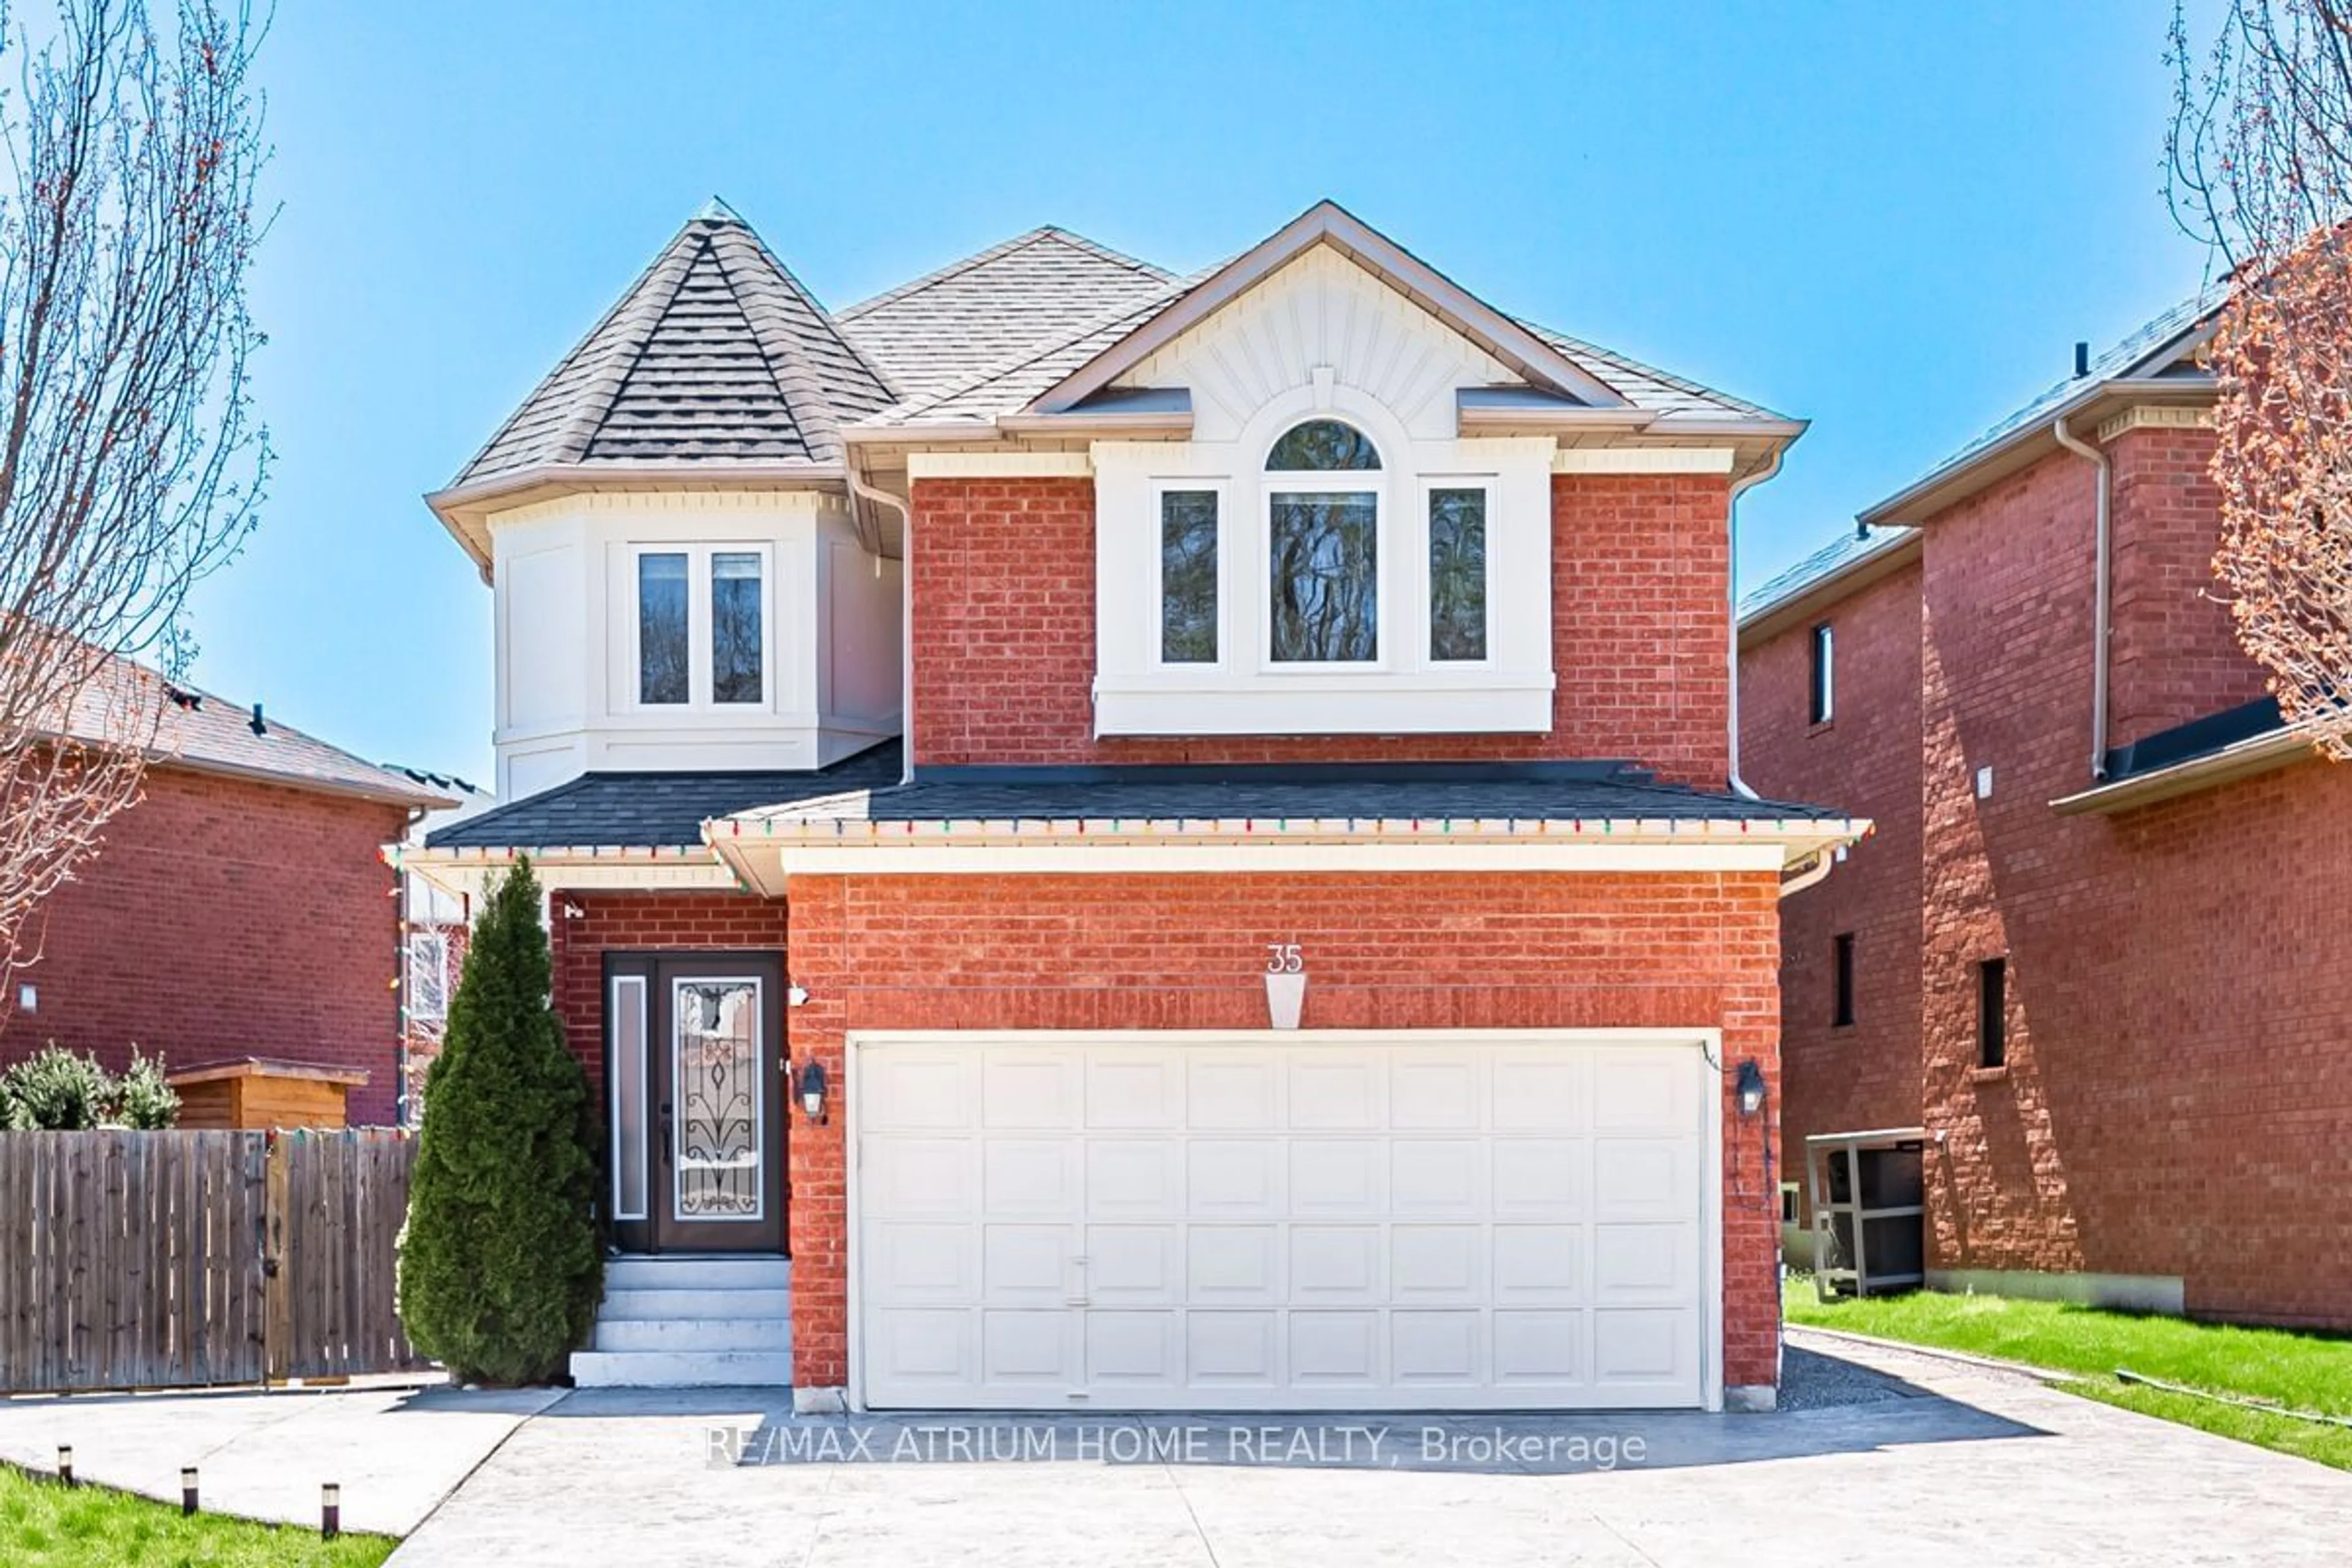 Home with brick exterior material for 35 Sunnyside Dr, Richmond Hill Ontario L4C 0S3